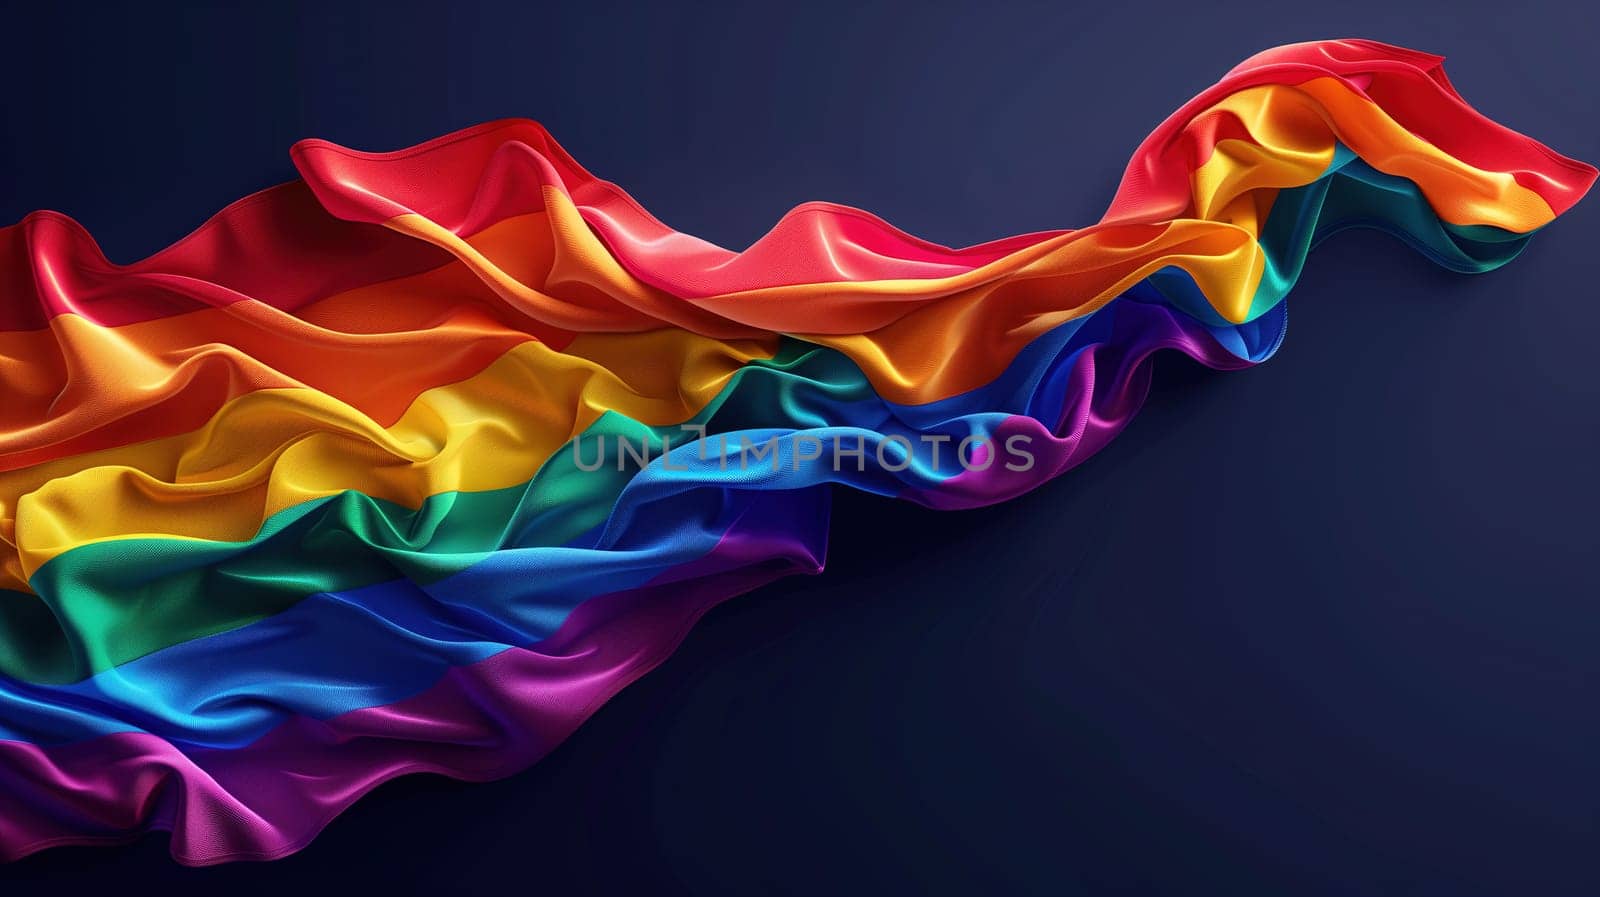 A brightly colored rainbow flag representing LGBT pride and solidarity waves gently, its folds catching light, against a contrasting dark blue backdrop. The flag is captured in a still moment, conveying a sense of motion and the diversity of the LGBT community.